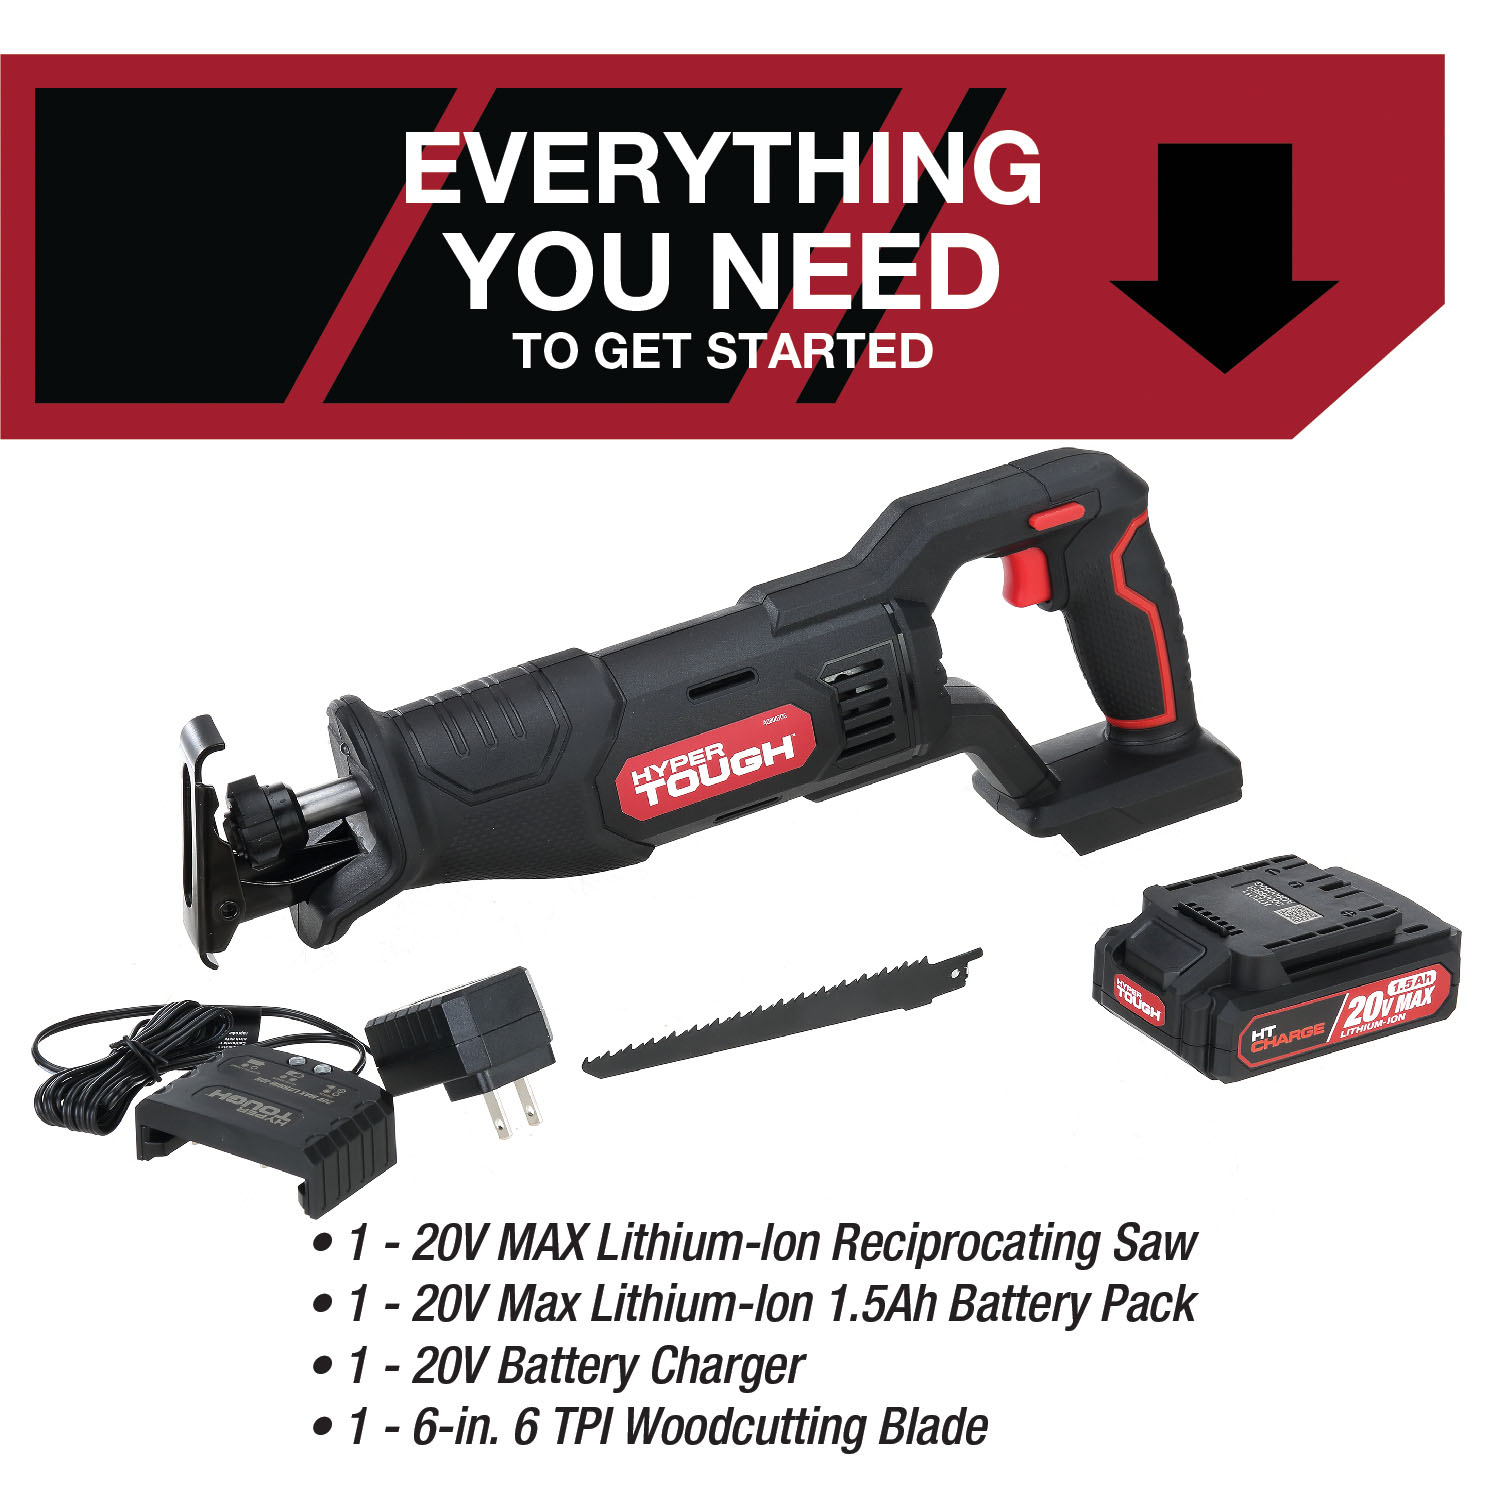 Hyper Tough 20V Max Lithium-ion Cordless Reciprocating Saw, Variable Speed, Keyless Blade Change, with 1.5Ah Lithium-Ion Battery and Charger, Wood Blade and LED Light - image 4 of 28